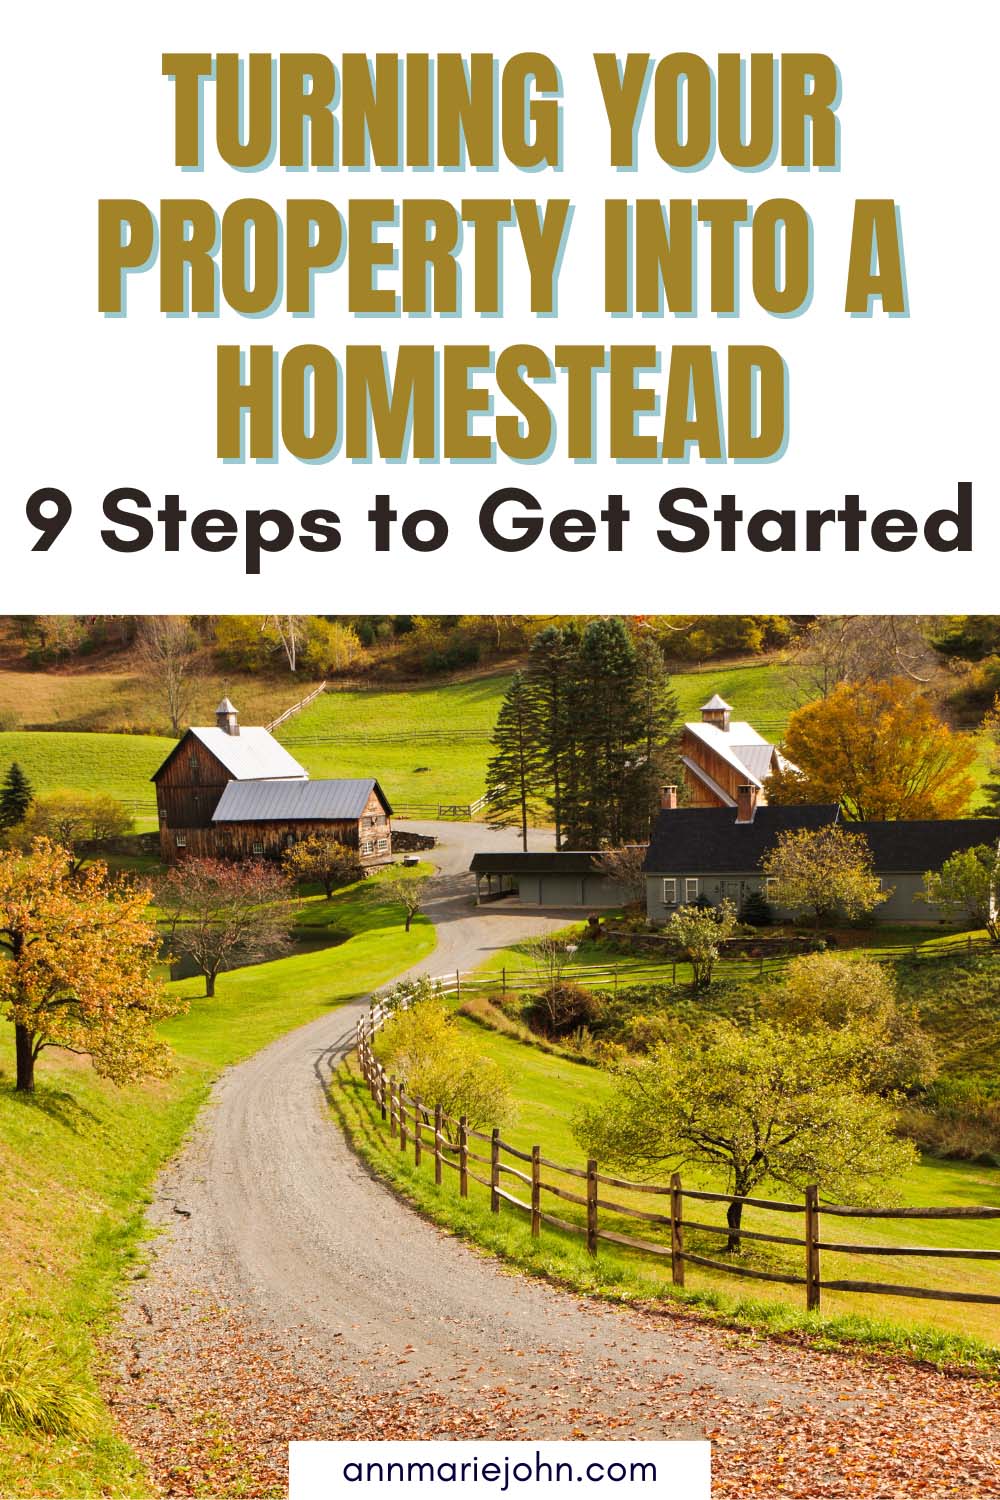 Turning Your Property Into A Homestead